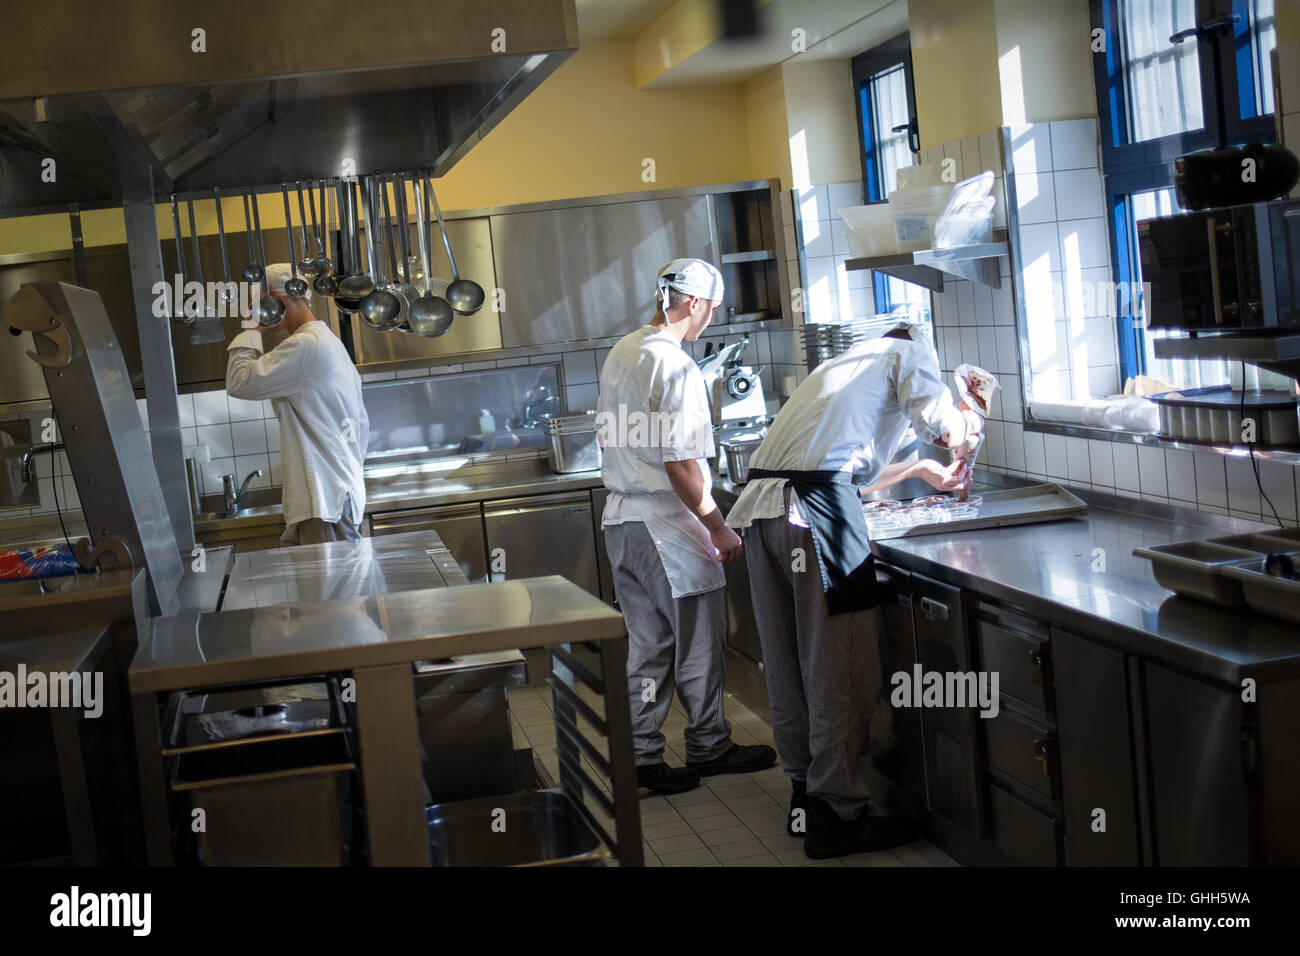 Schleswig, Germany. 13th Sep, 2016. Young prisoners work in the kitchen of the juvenile prison in Schleswig, Germany, 13 September 2016. Young prisoners are prepared for a later job and trained in the context of a job training project in the juvenile prison. PHOTO: CHRISTIAN CHARISIUS/dpa/Alamy Live News Stock Photo